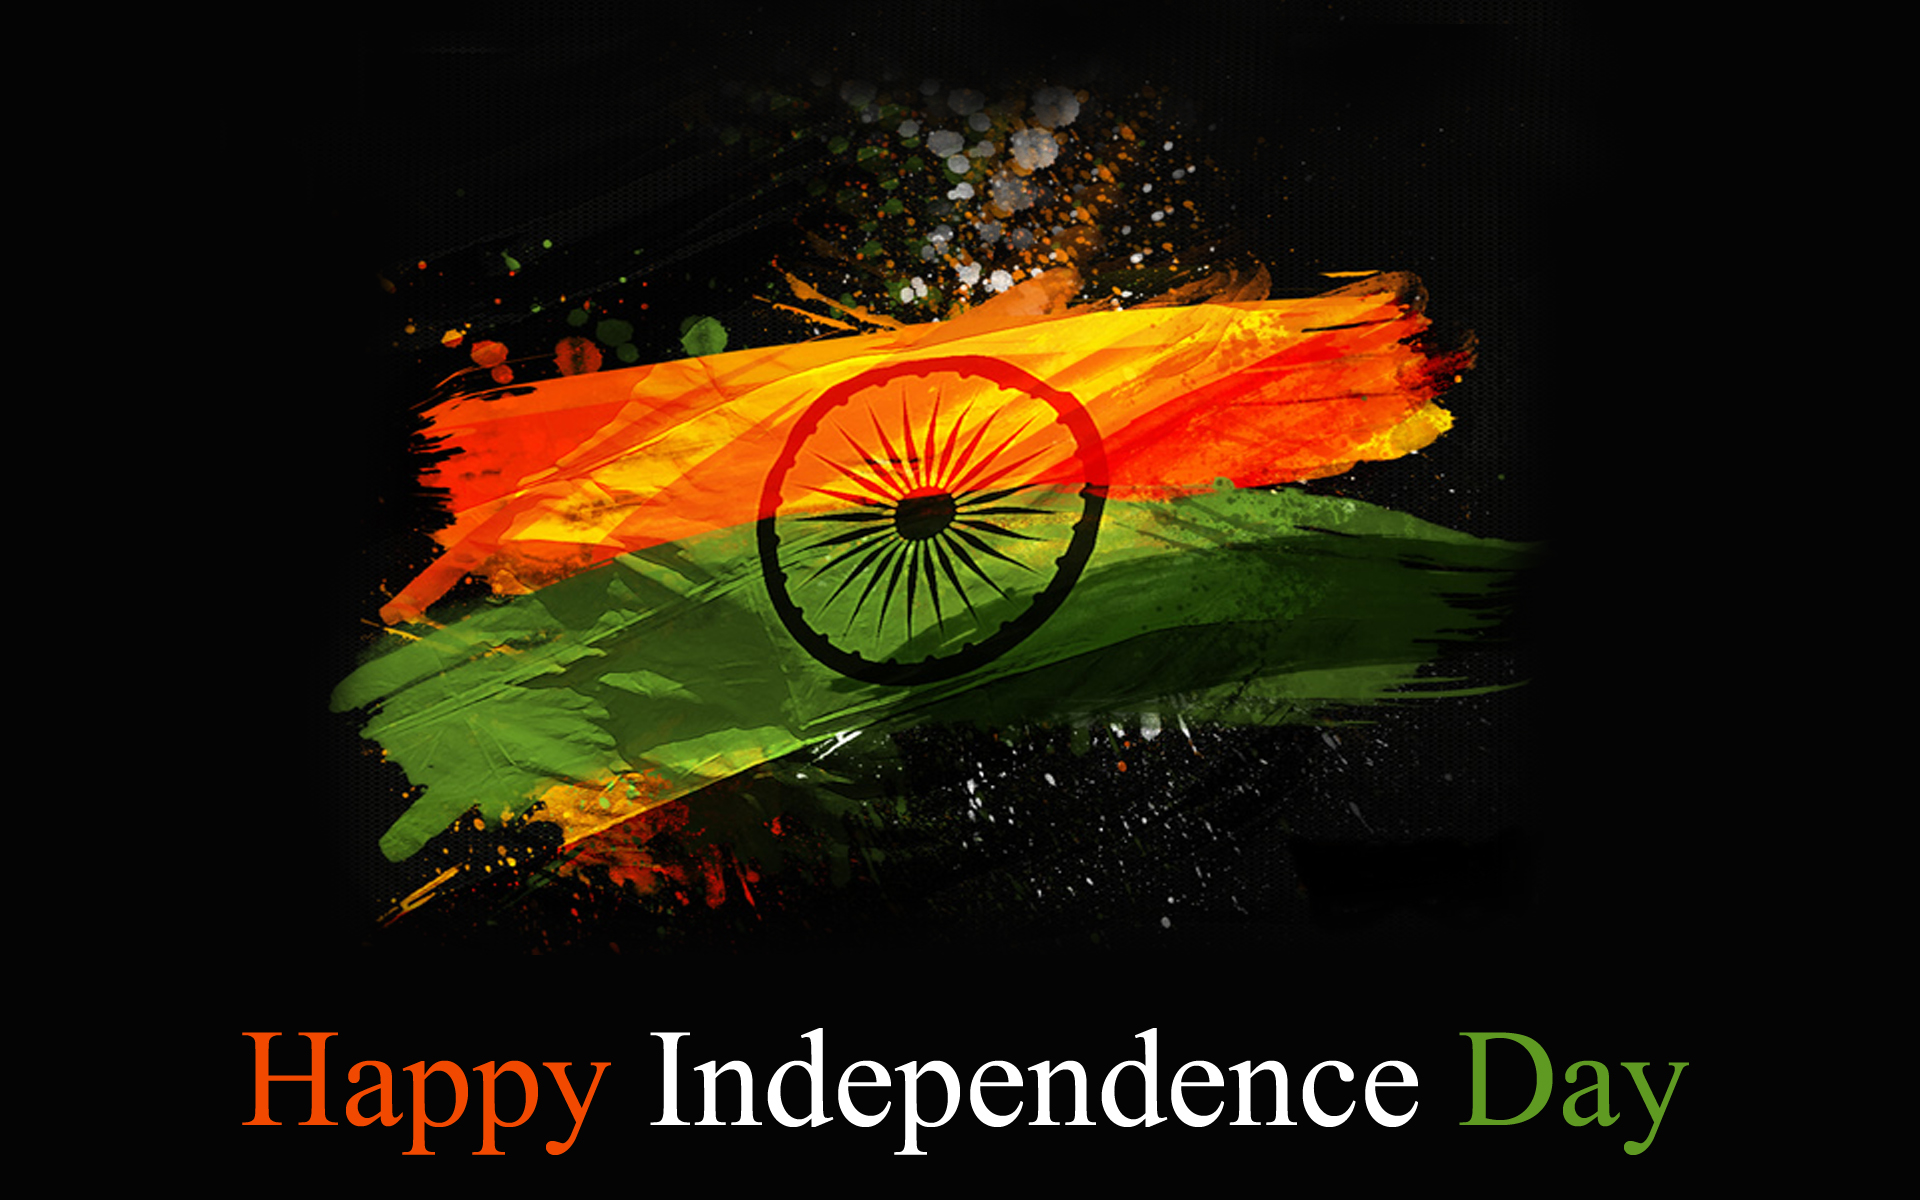 Happy th Independence Day 2021 Wishes, Quotes, Slogans Whatsapp Status Dp